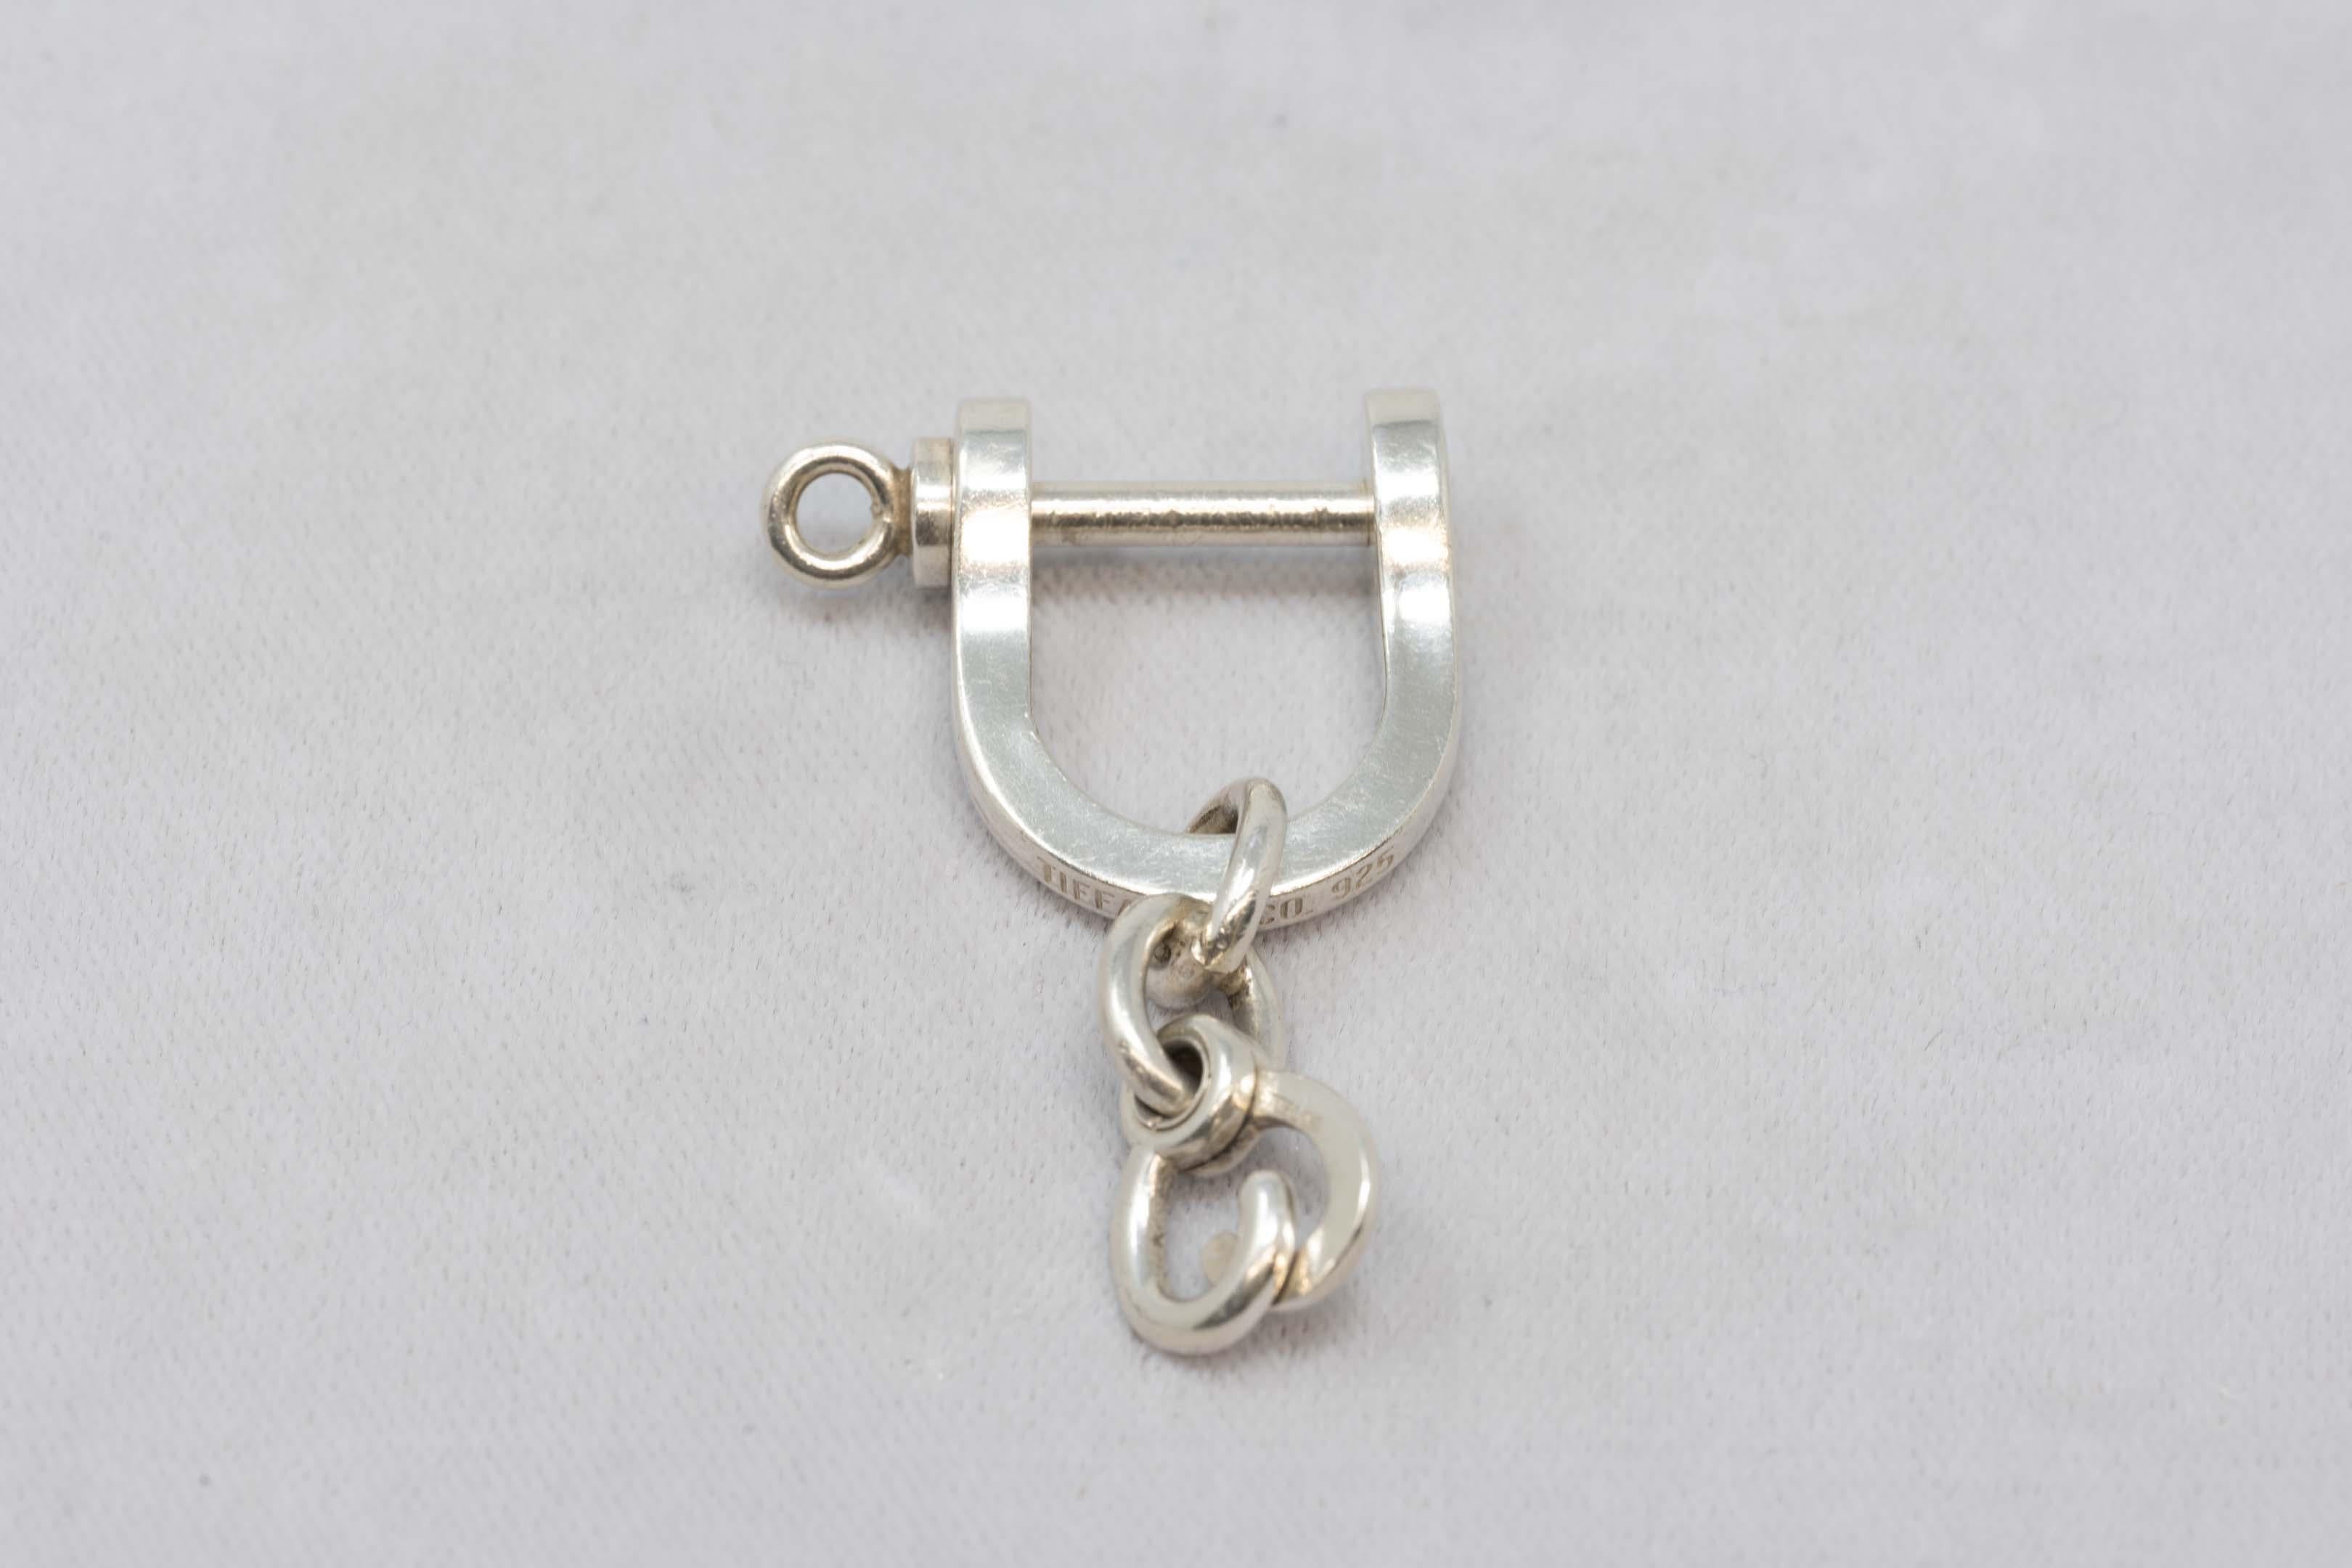 Tiffany & Co sterling silver stirrup keychain preowned, some scratches. Signed Tiffany & Co. 925. Measures 2 inches long x 1 1/4 inches wide. Made in the USA, late 20th century.